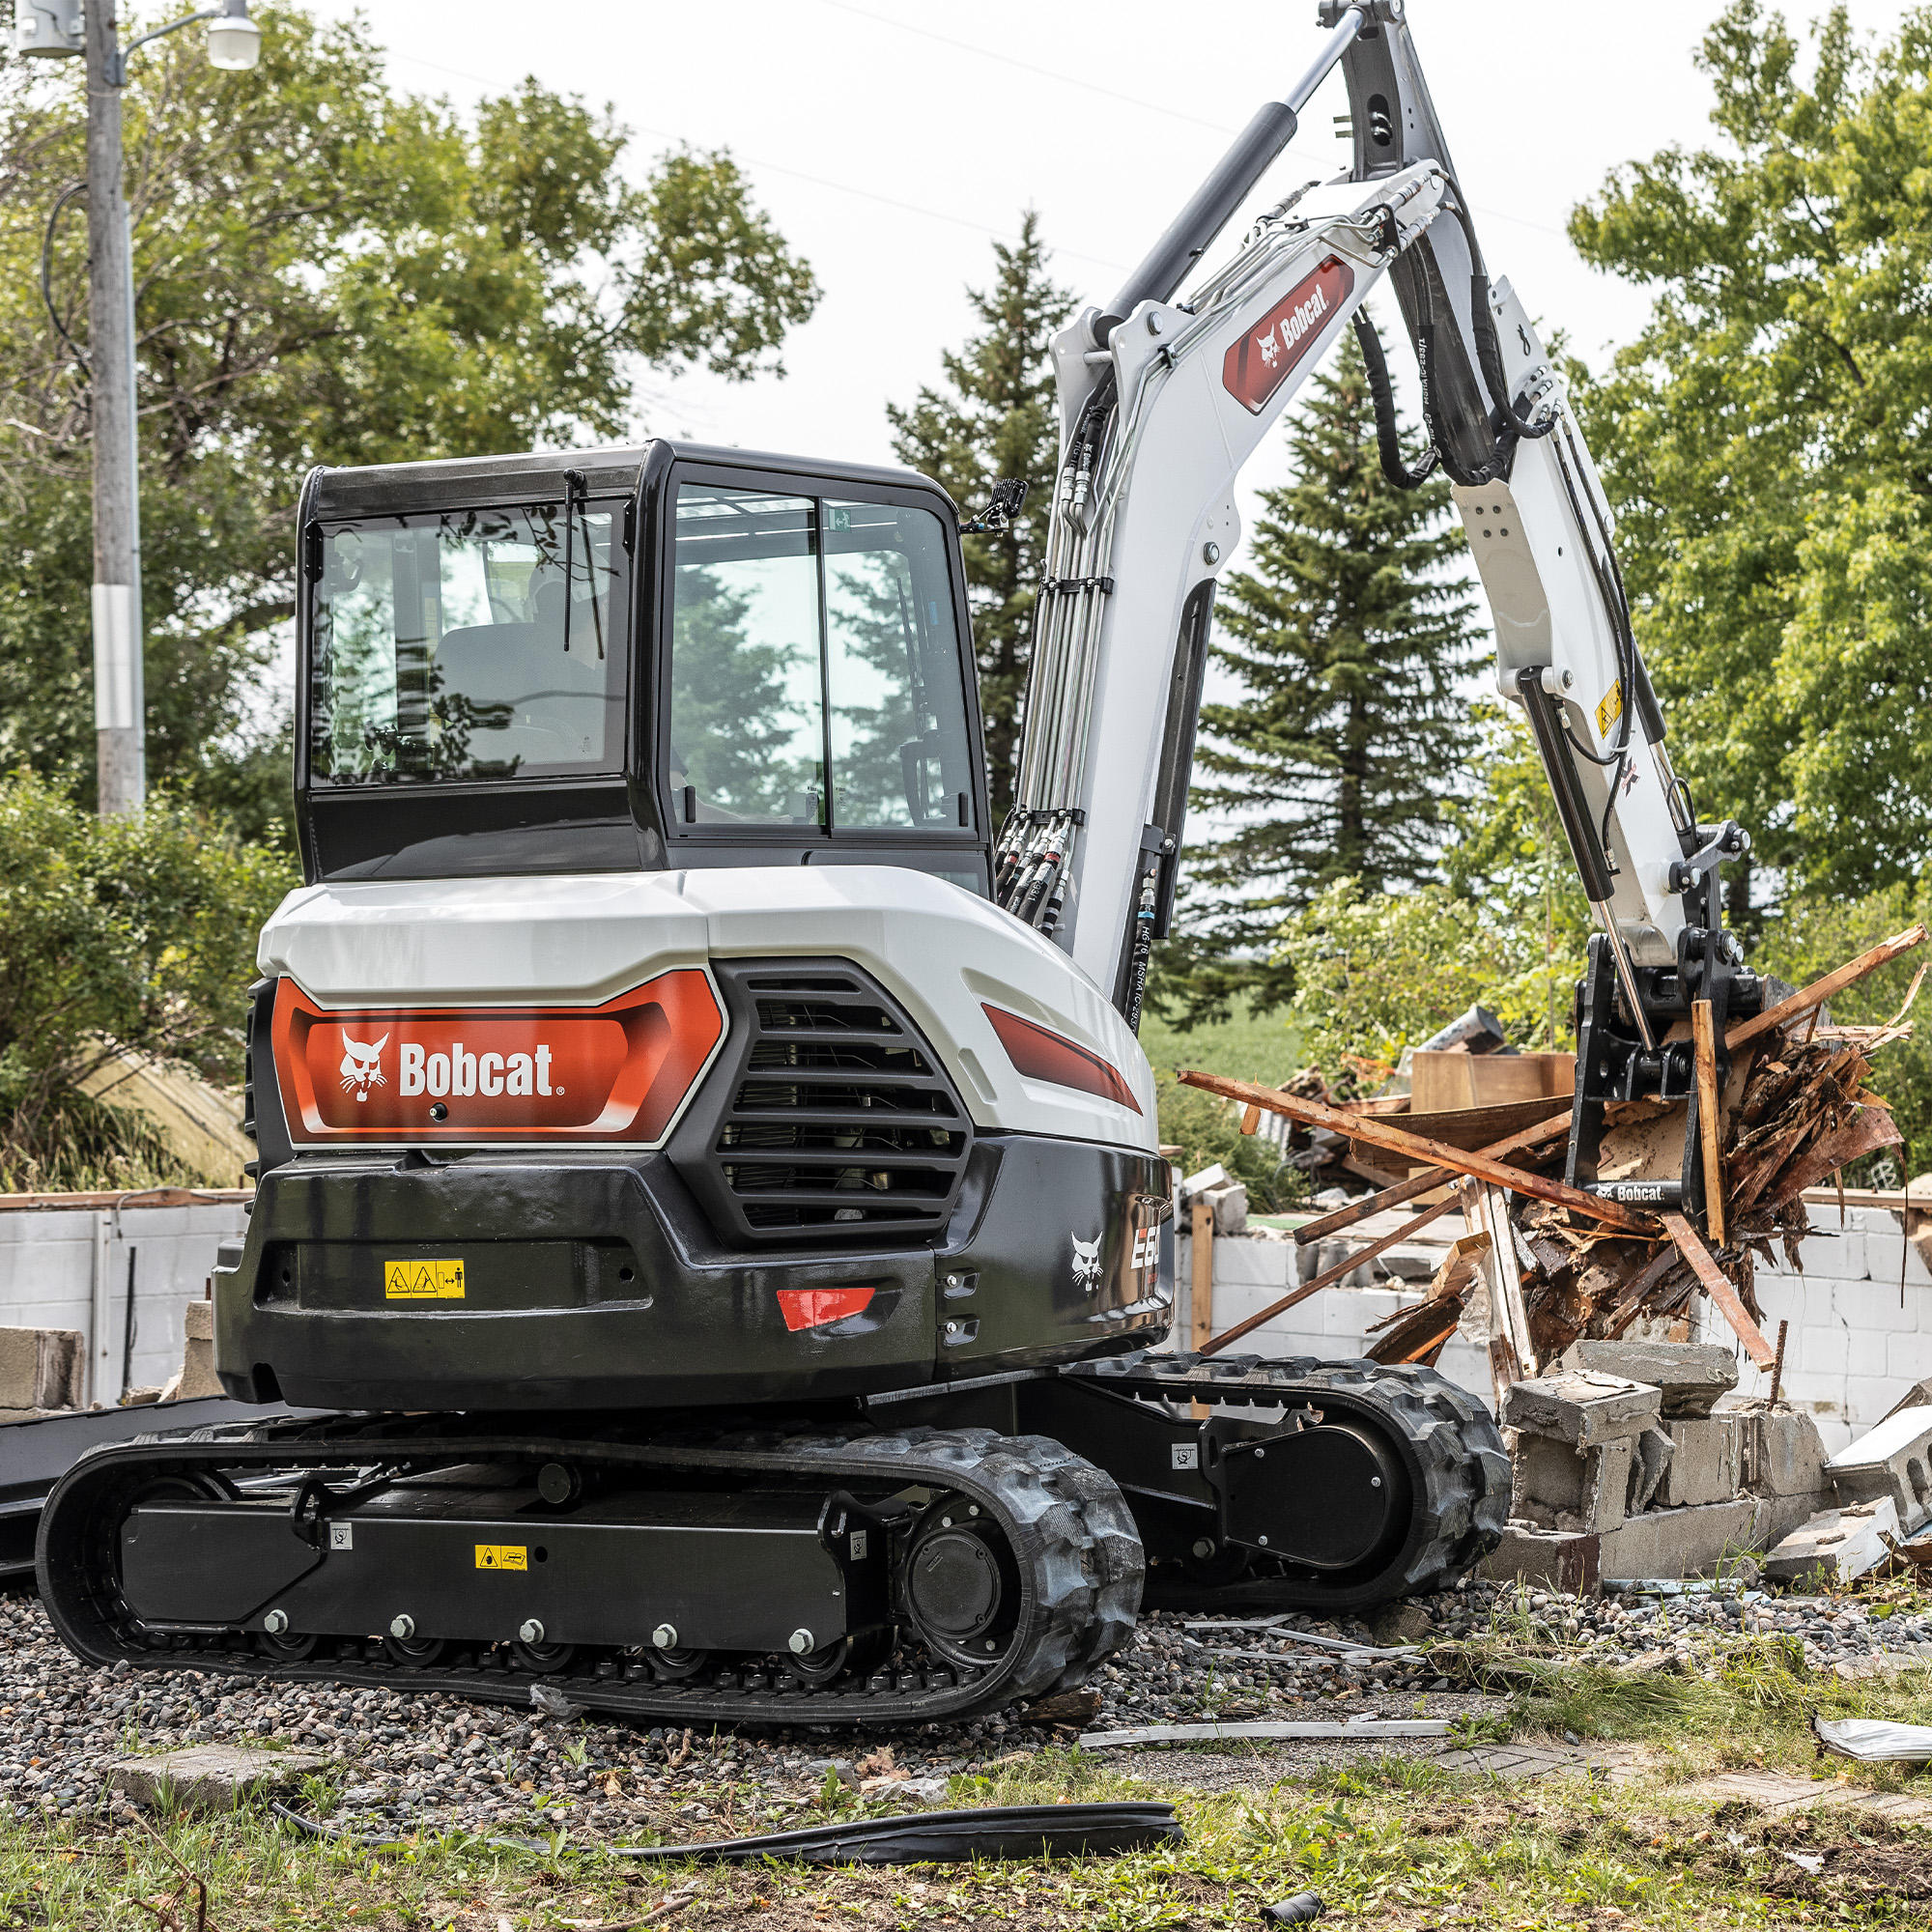 Bobcat E60 compact excavator performing demolition Bobcat of Fort McMurray Fort Mcmurray (780)714-9200